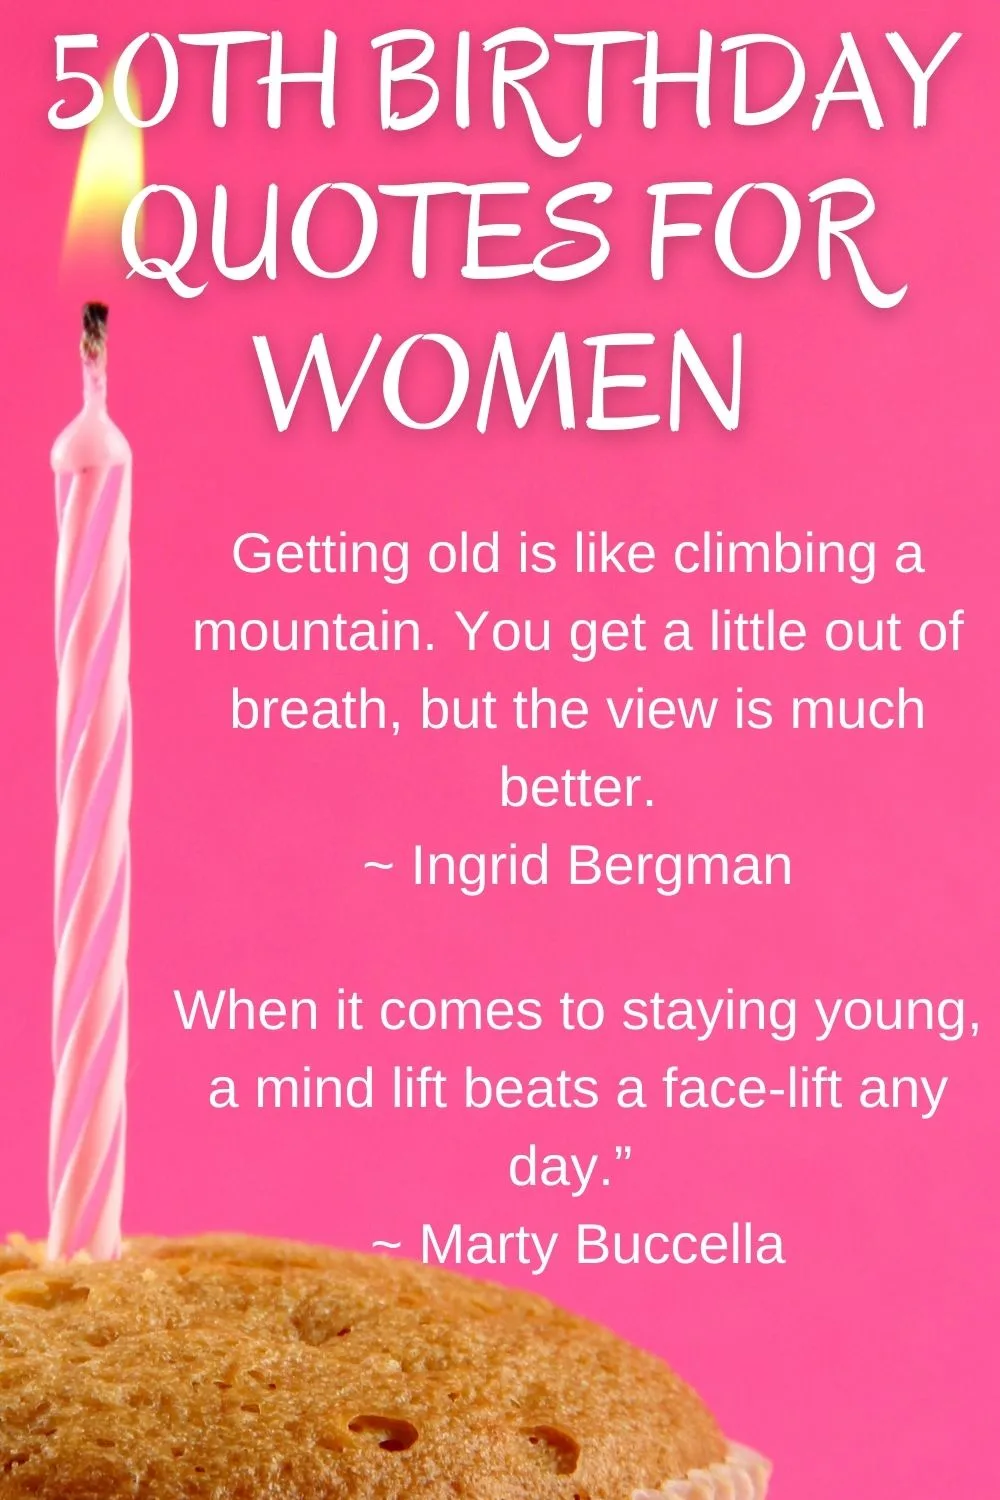 50th birthday quotes for women